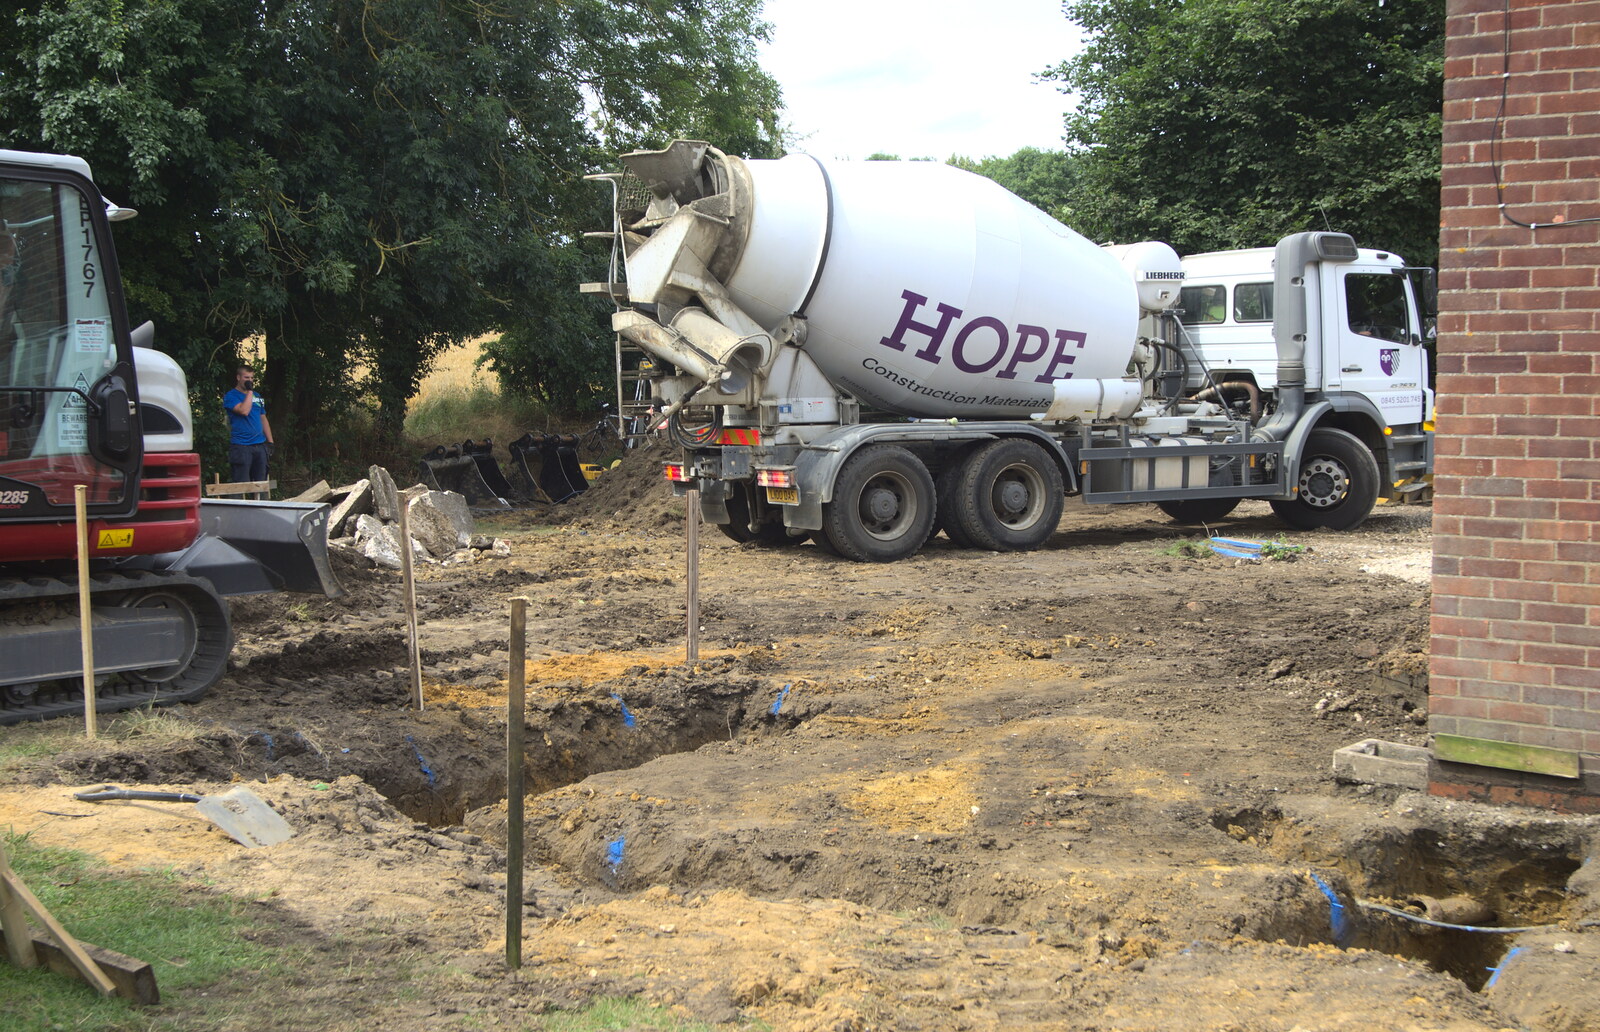 The concrete mixer gets ready to unload from Grand Designs: Building Commences, Brome, Suffolk - 8th August 2013